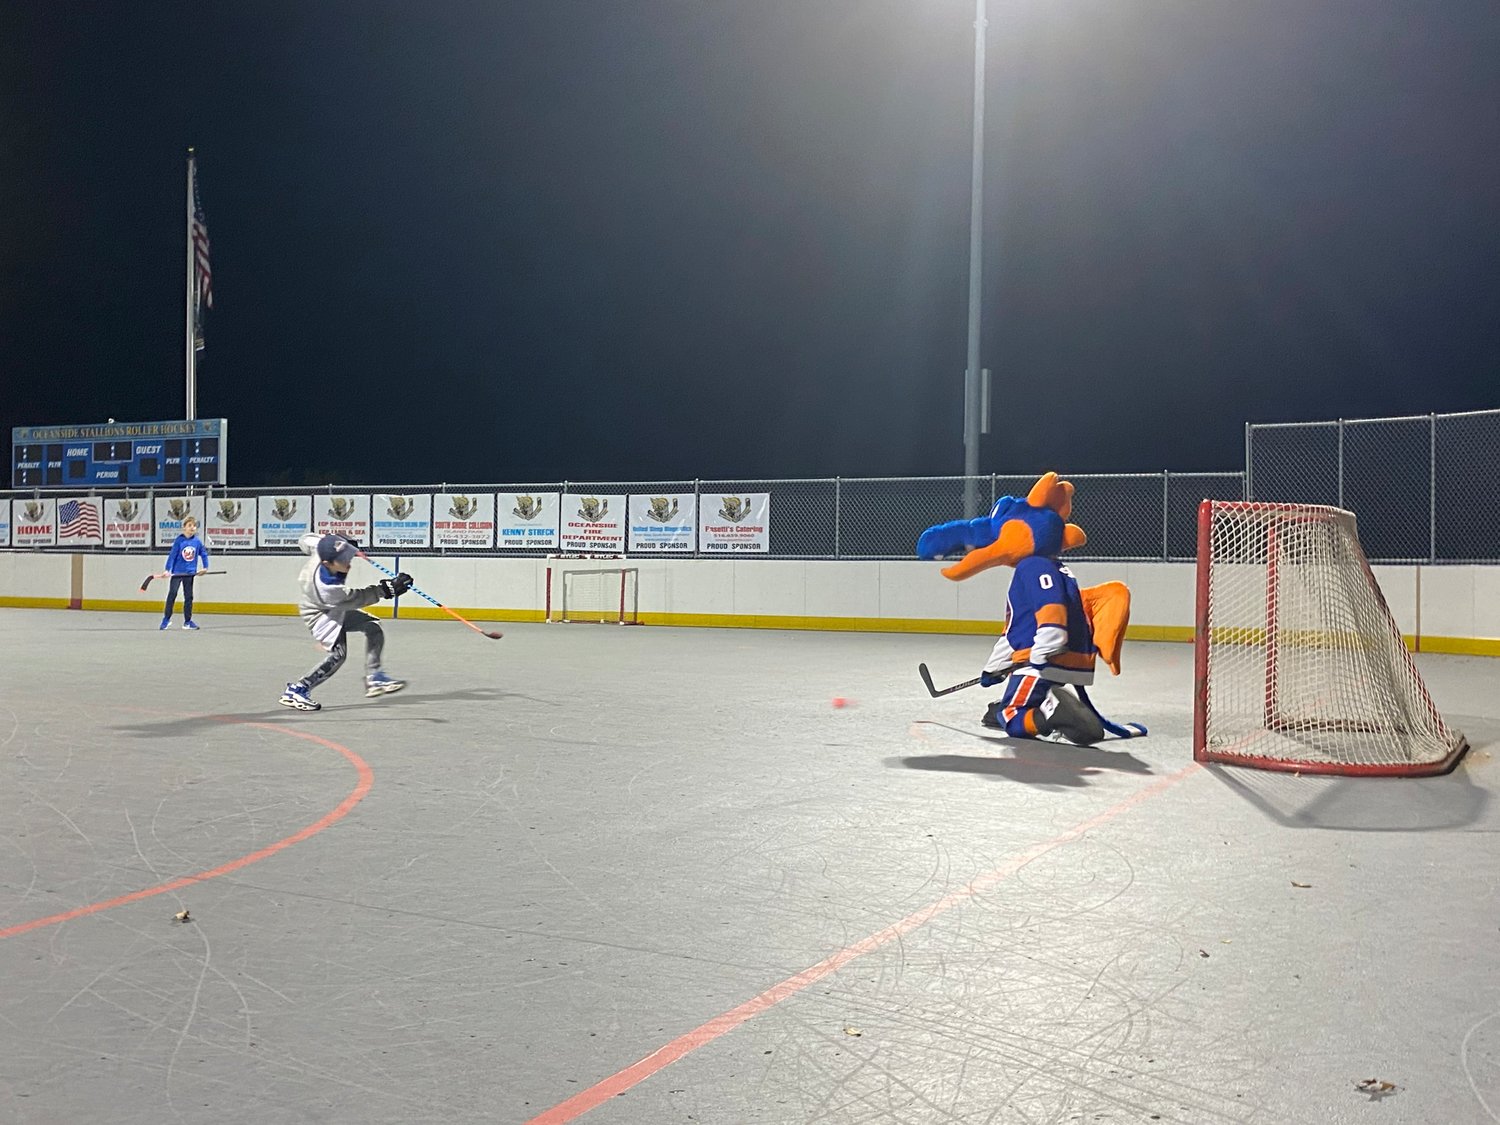 A participant of the clinics rips a shot at Sparky during a shootout challenge.